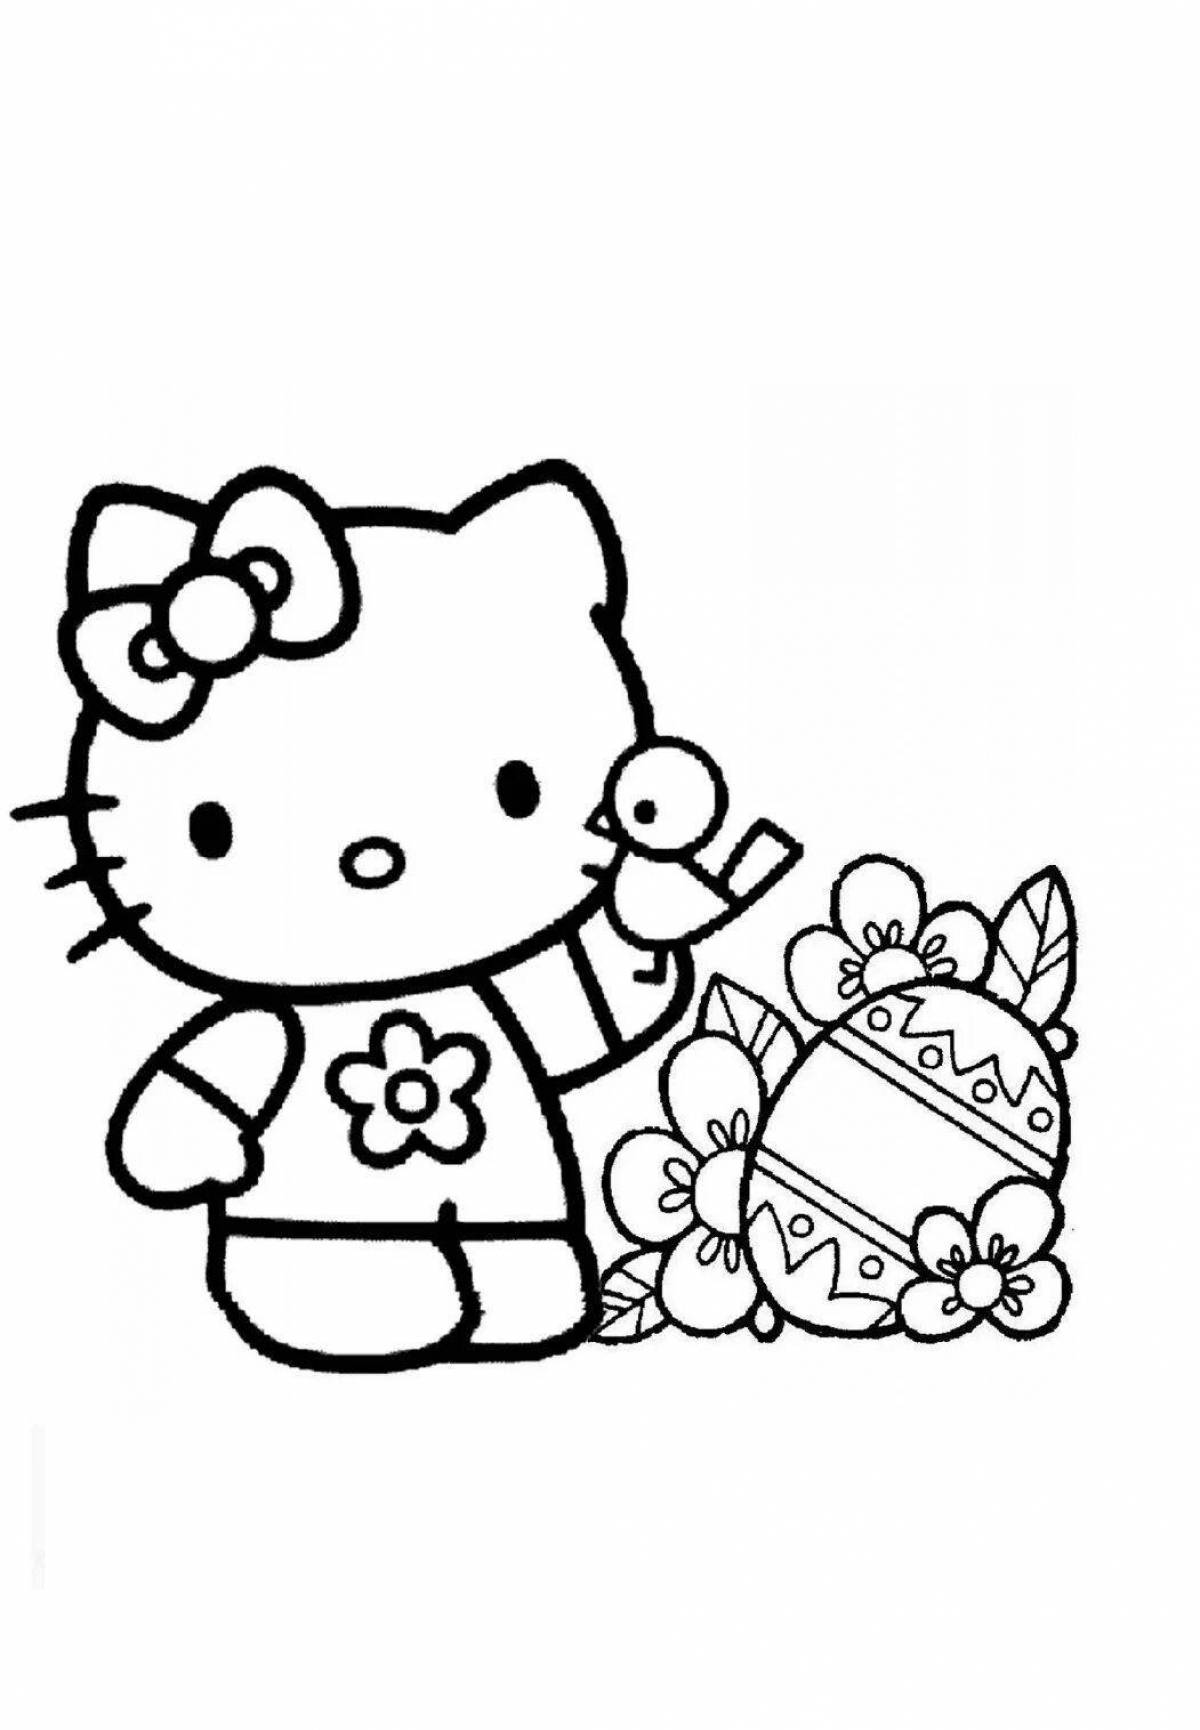 Furry hello kitty coloring page